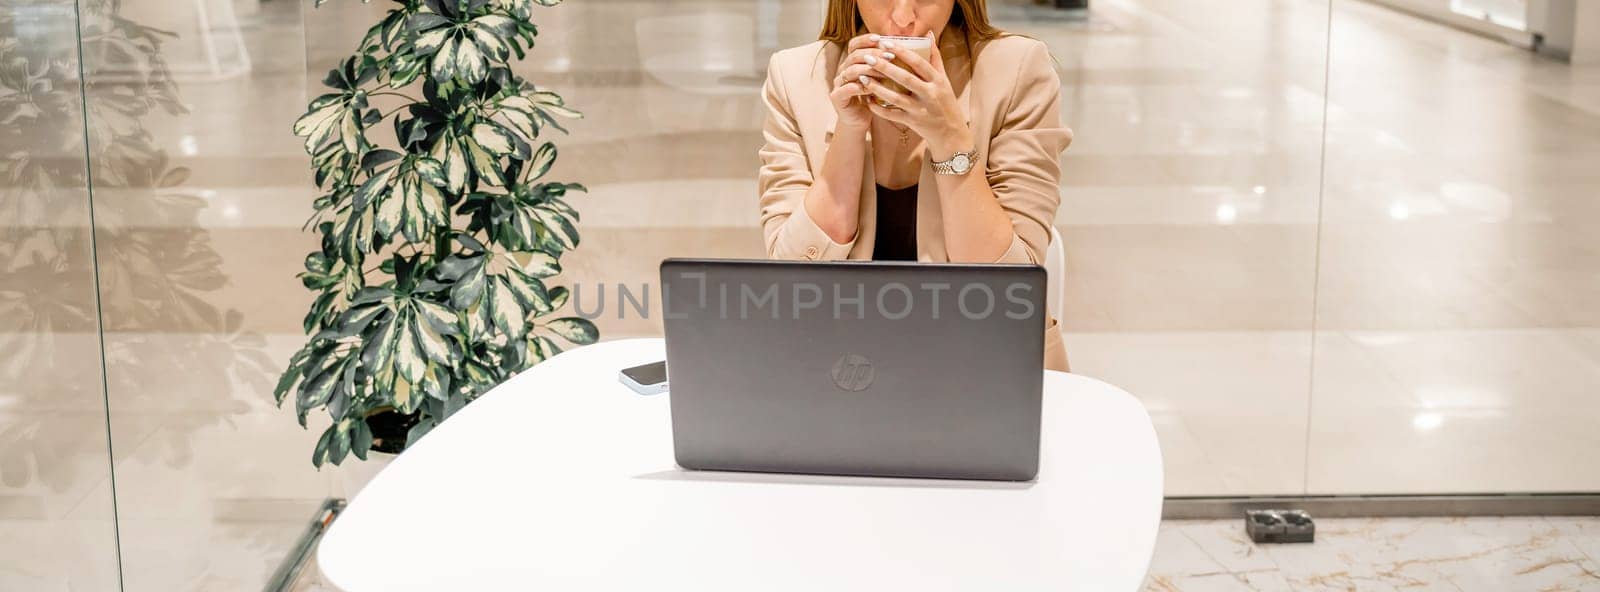 A business woman sits in a cafe, works at a computer, drinks coffee. She is wearing a beige jacket, brown top and black trousers. by Matiunina